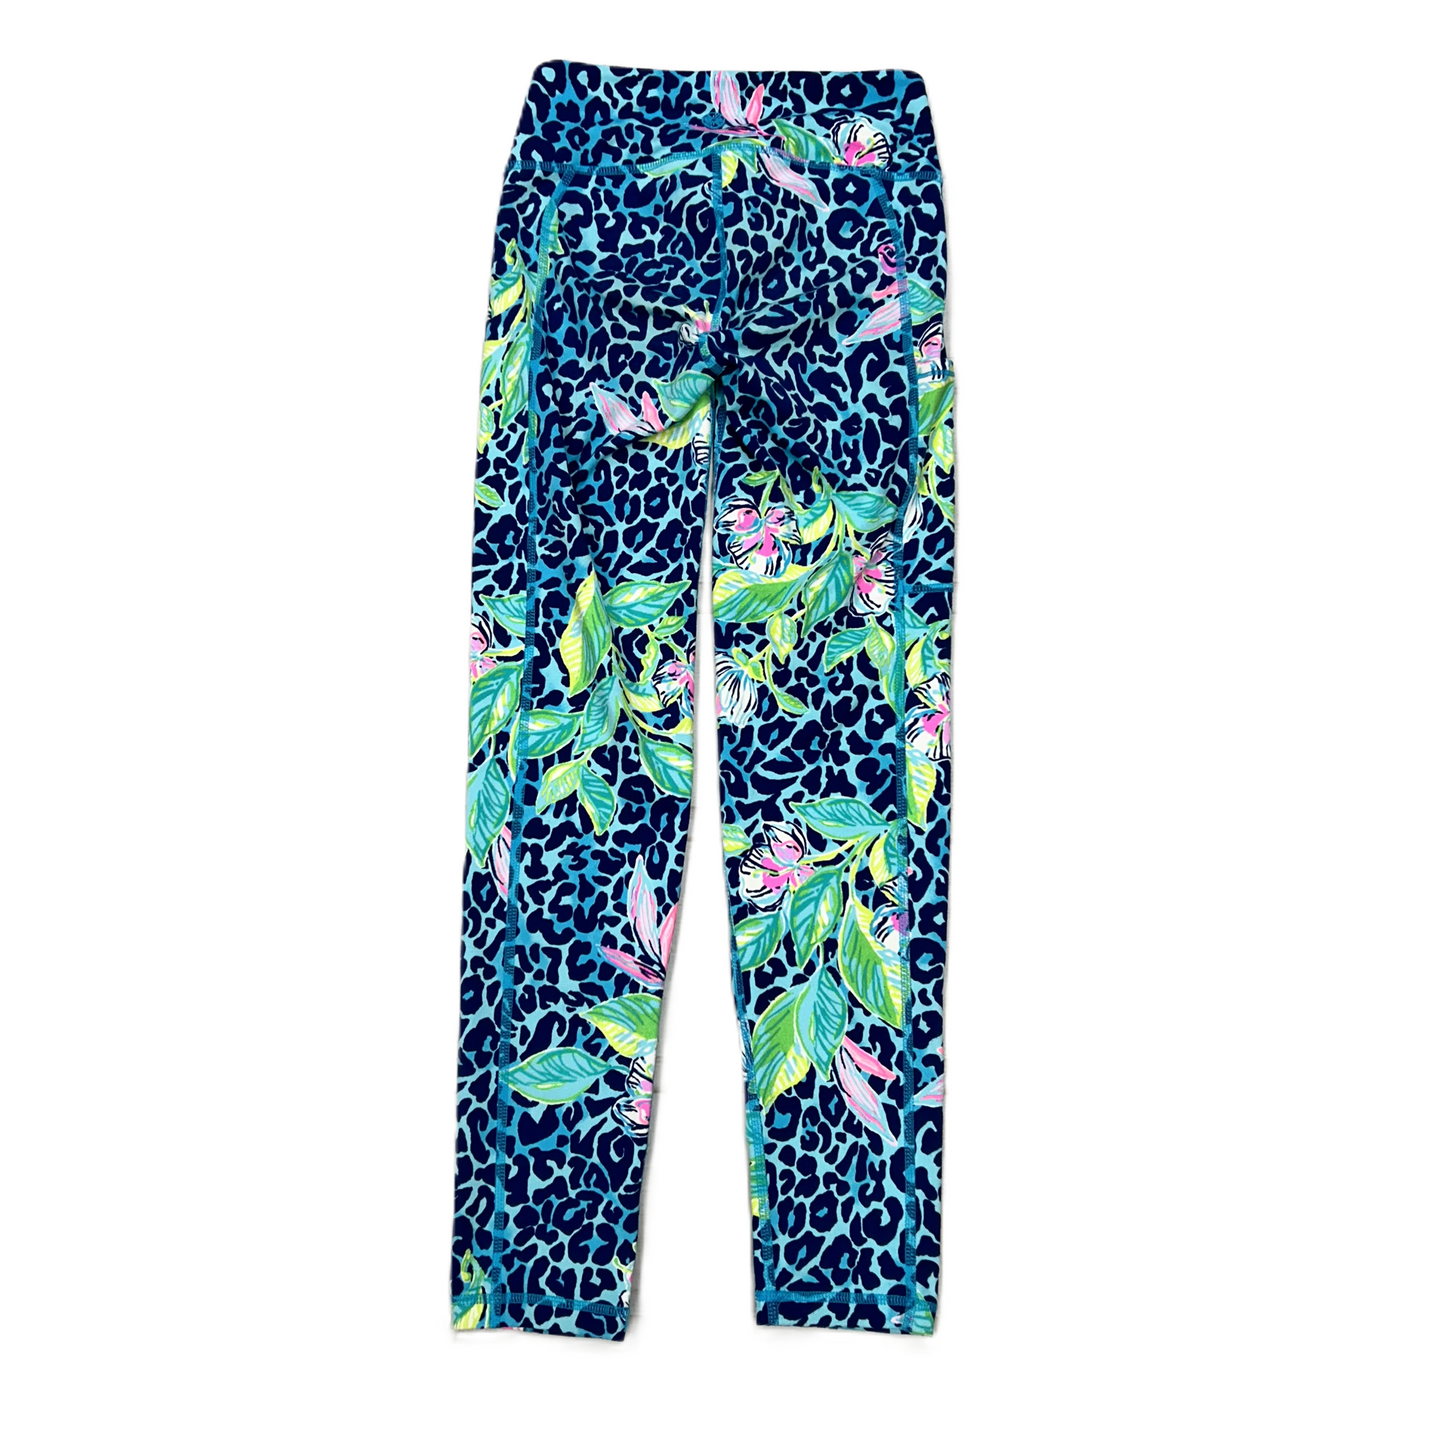 Blue & Green Pants Designer By Lilly Pulitzer, Size: Xxs